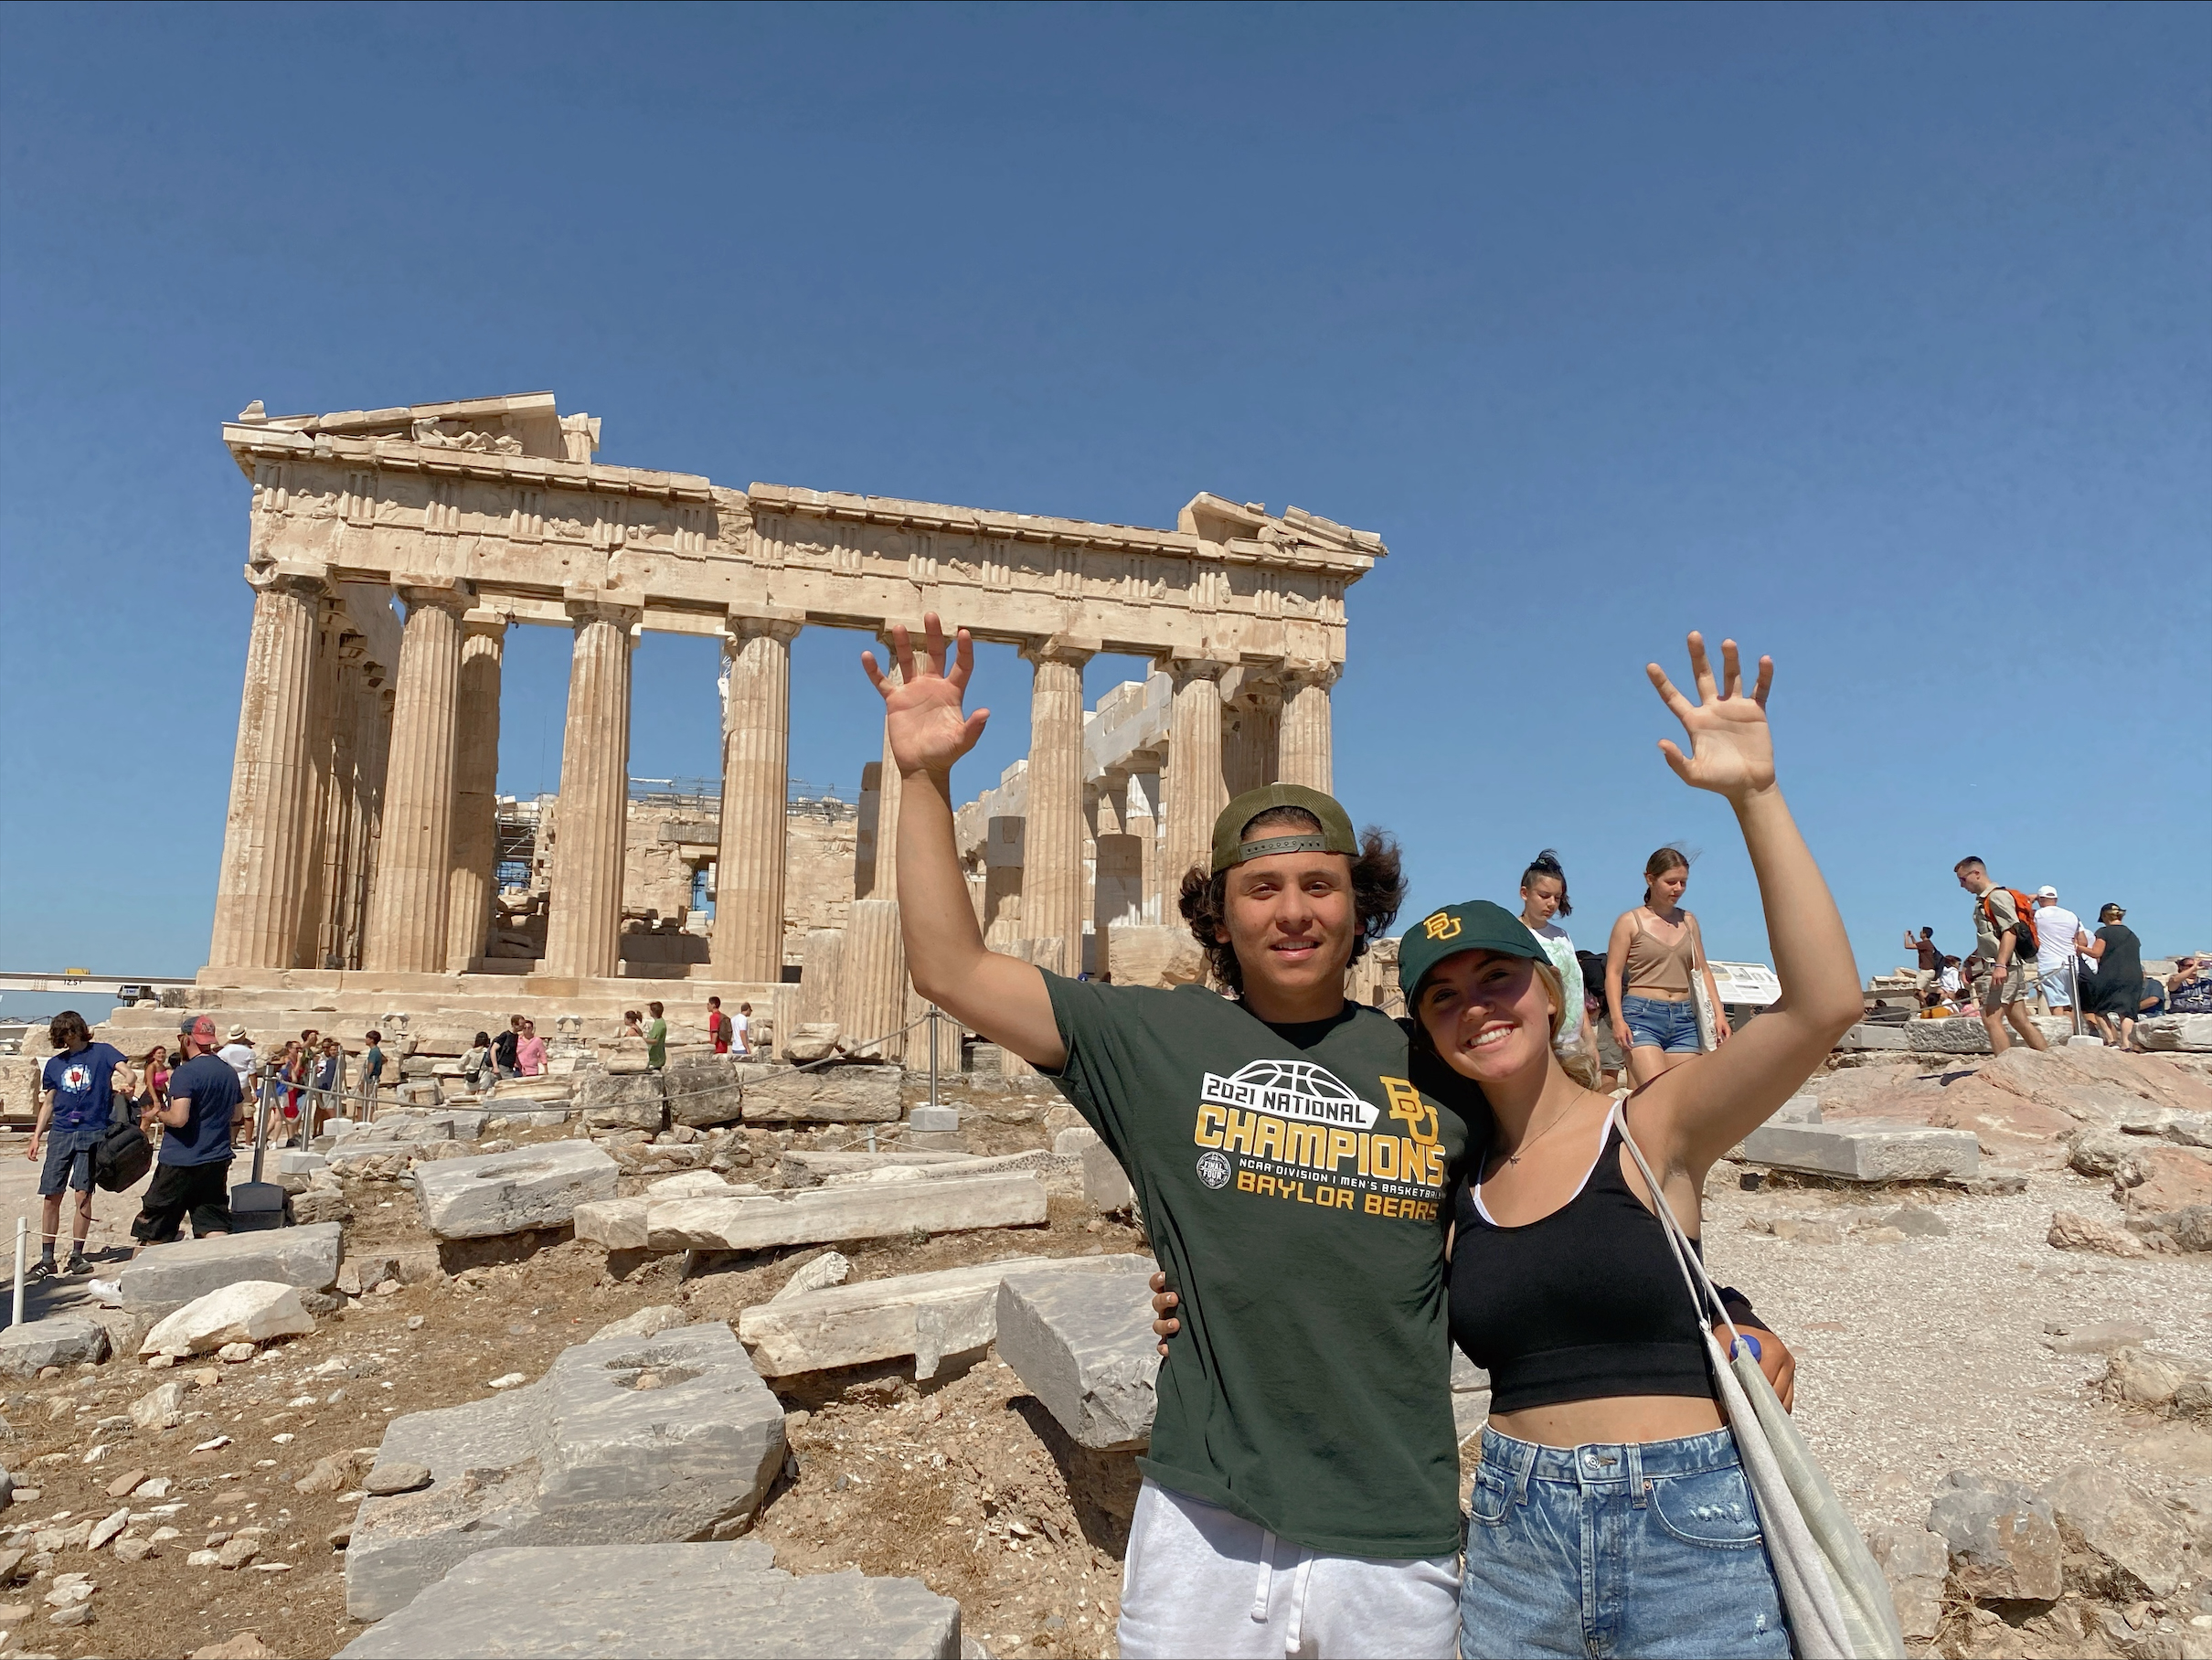 Two Baylor students outside ruins in Greece